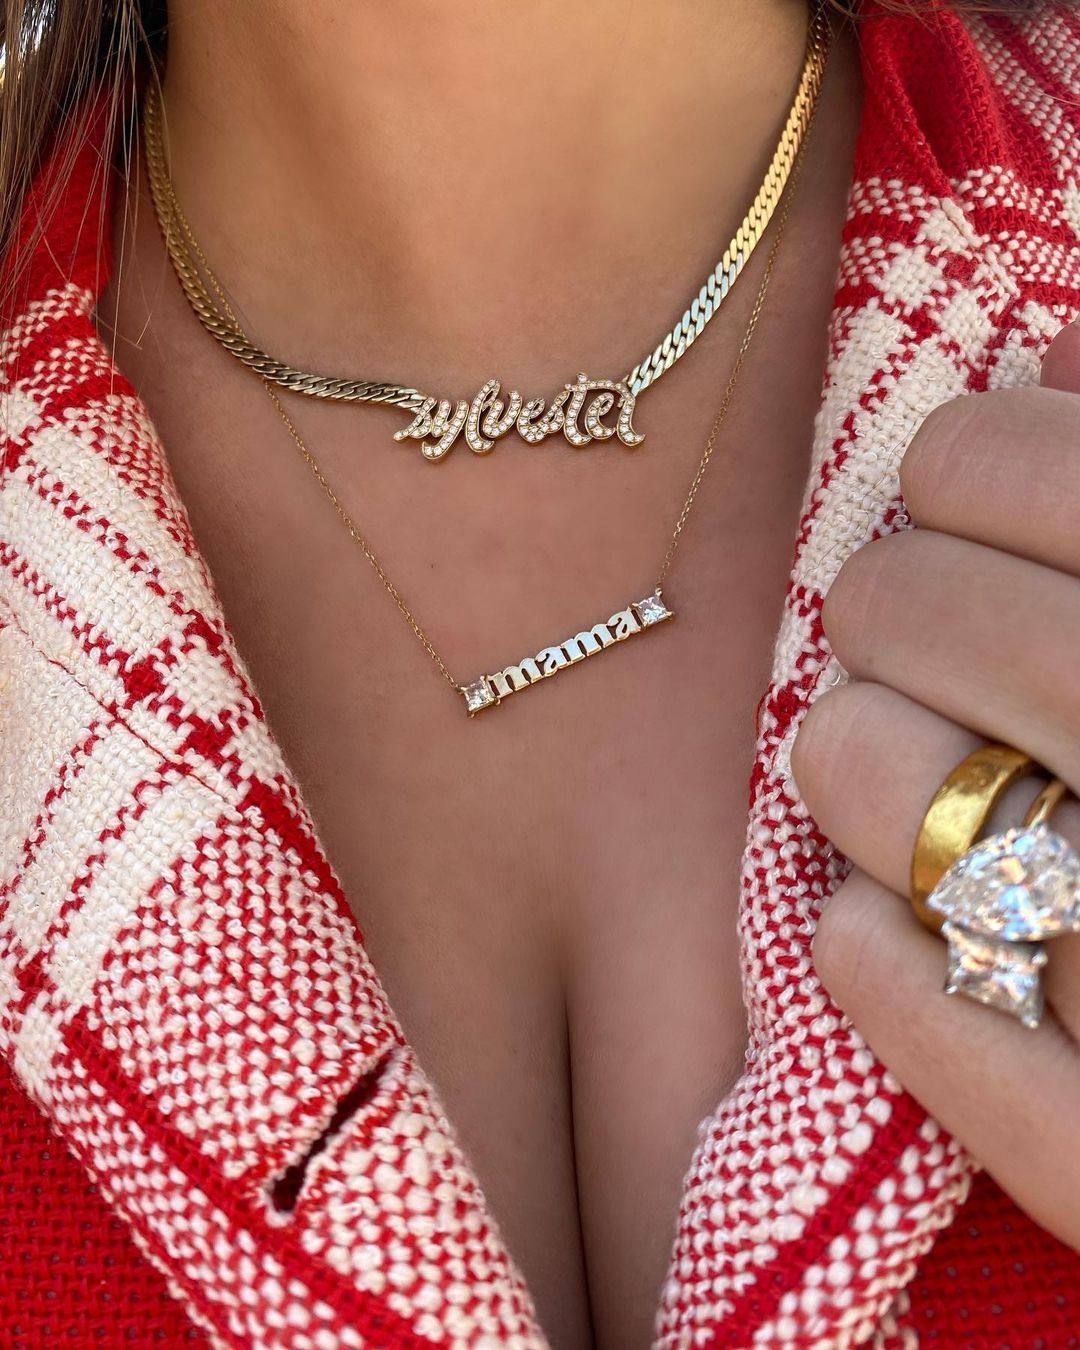 Model Emily Ratajkowski wears a necklace spelling out her son’s name – as well as a “mama” necklace. Whether they feature a thumbprint, hieroglyphs or Morse code, super-personalised pieces make jewellery even more meaningful to the wearer. Photos: Handouts